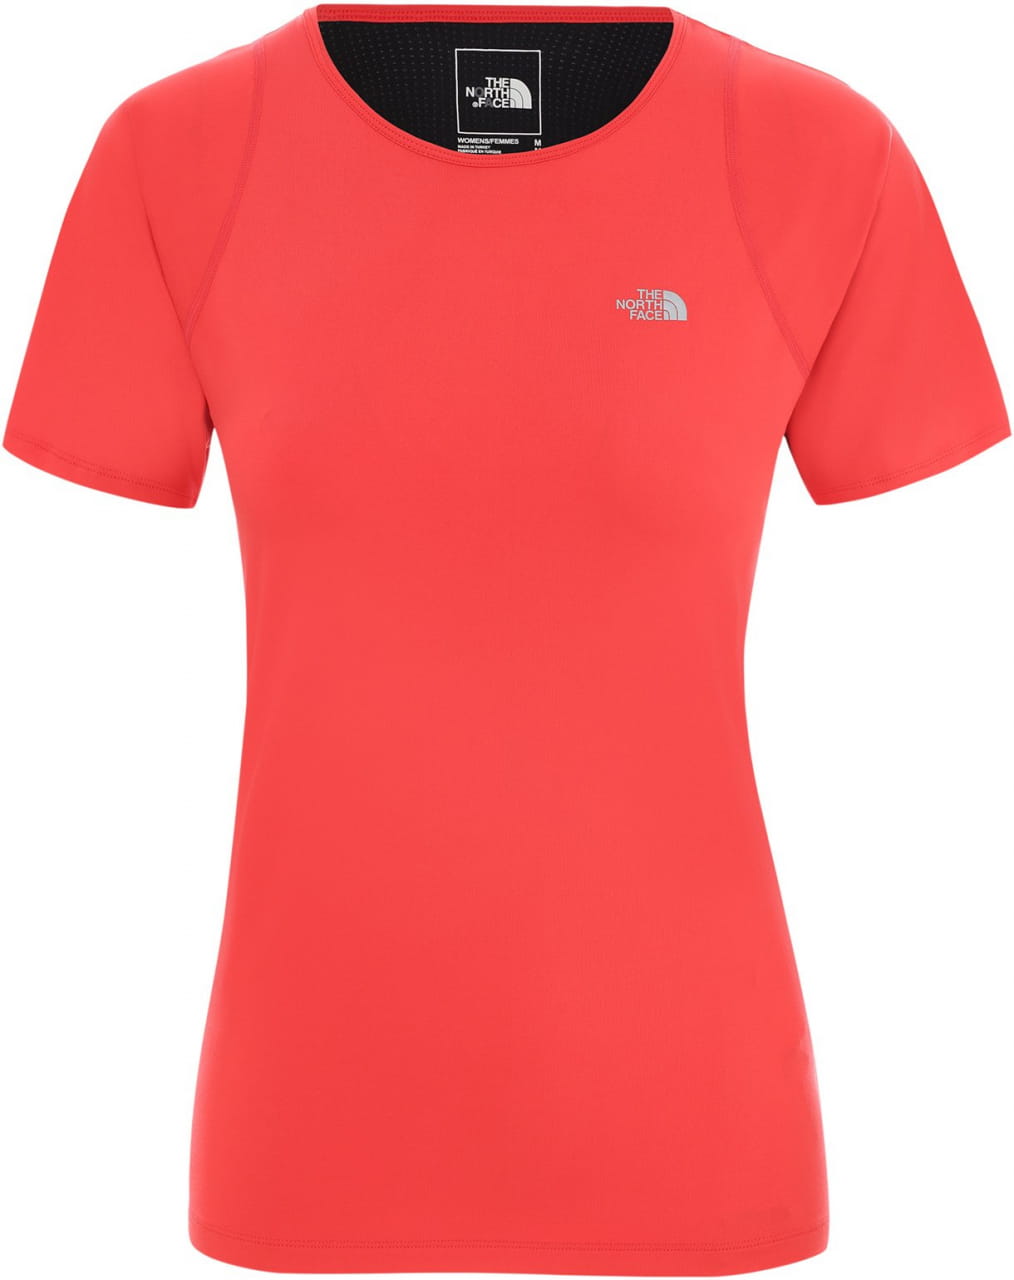 T-Shirts The North Face Women's Ambition T-Shirt